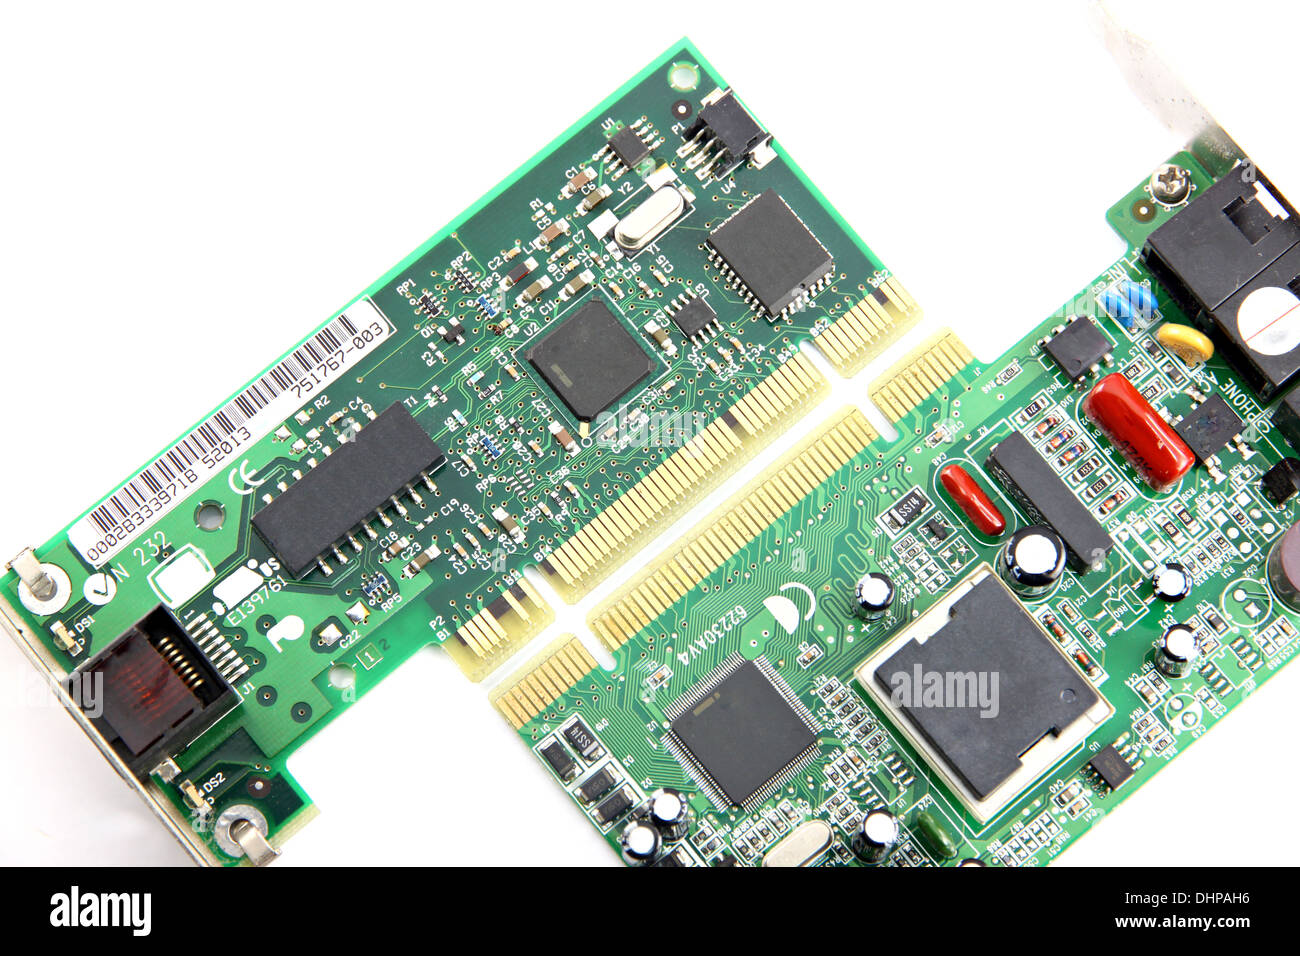 The modem Connection Internet Computer equipment circuit board on white background. Stock Photo